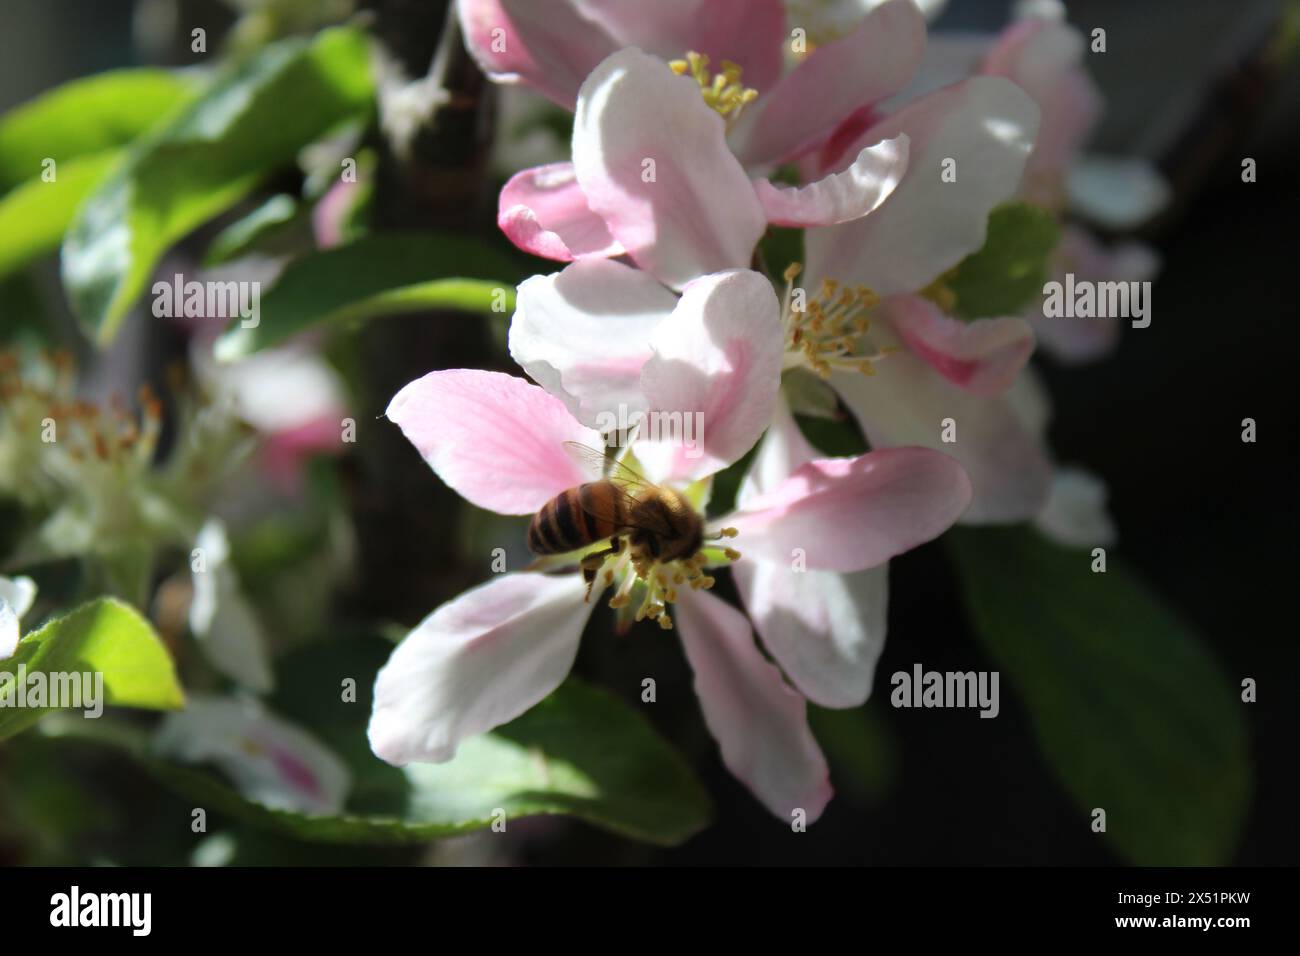 A honey bee on an apple blossom tree in my garden Stock Photo